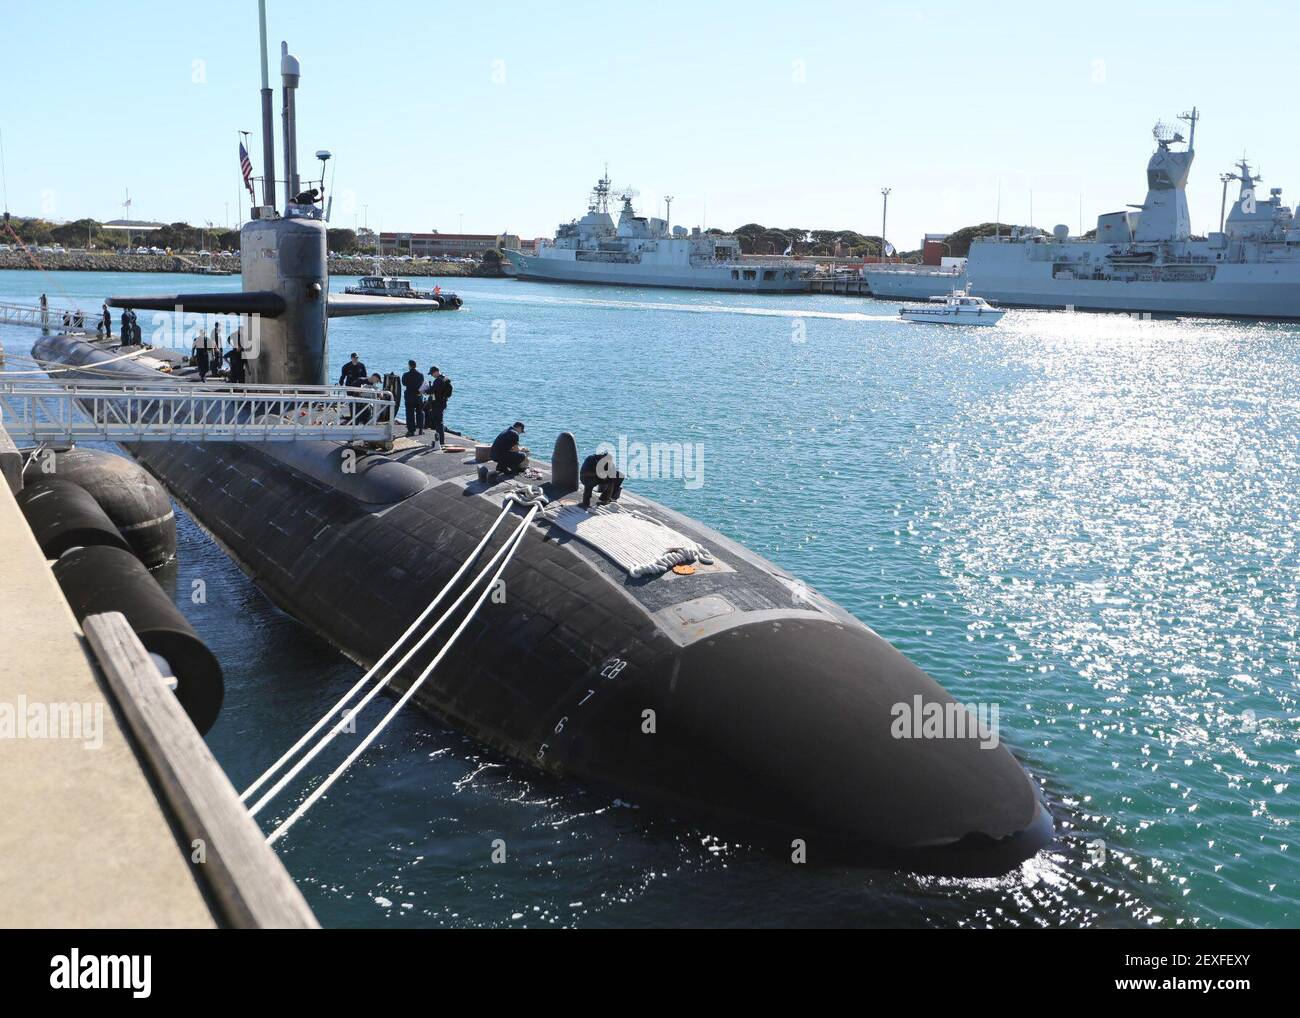 STIRLING, Australia (June 25, 2015) The Los Angeles-class attack submarine USS Jacksonville (SSN 699) is moored in Stirling, Australia. Jacksonville is in Australia as a part of its Deployment (Photo by U.S. Navy) 150625-N-ZZ999-007 *** Please Use Credit from Credit Field *** Stock Photo